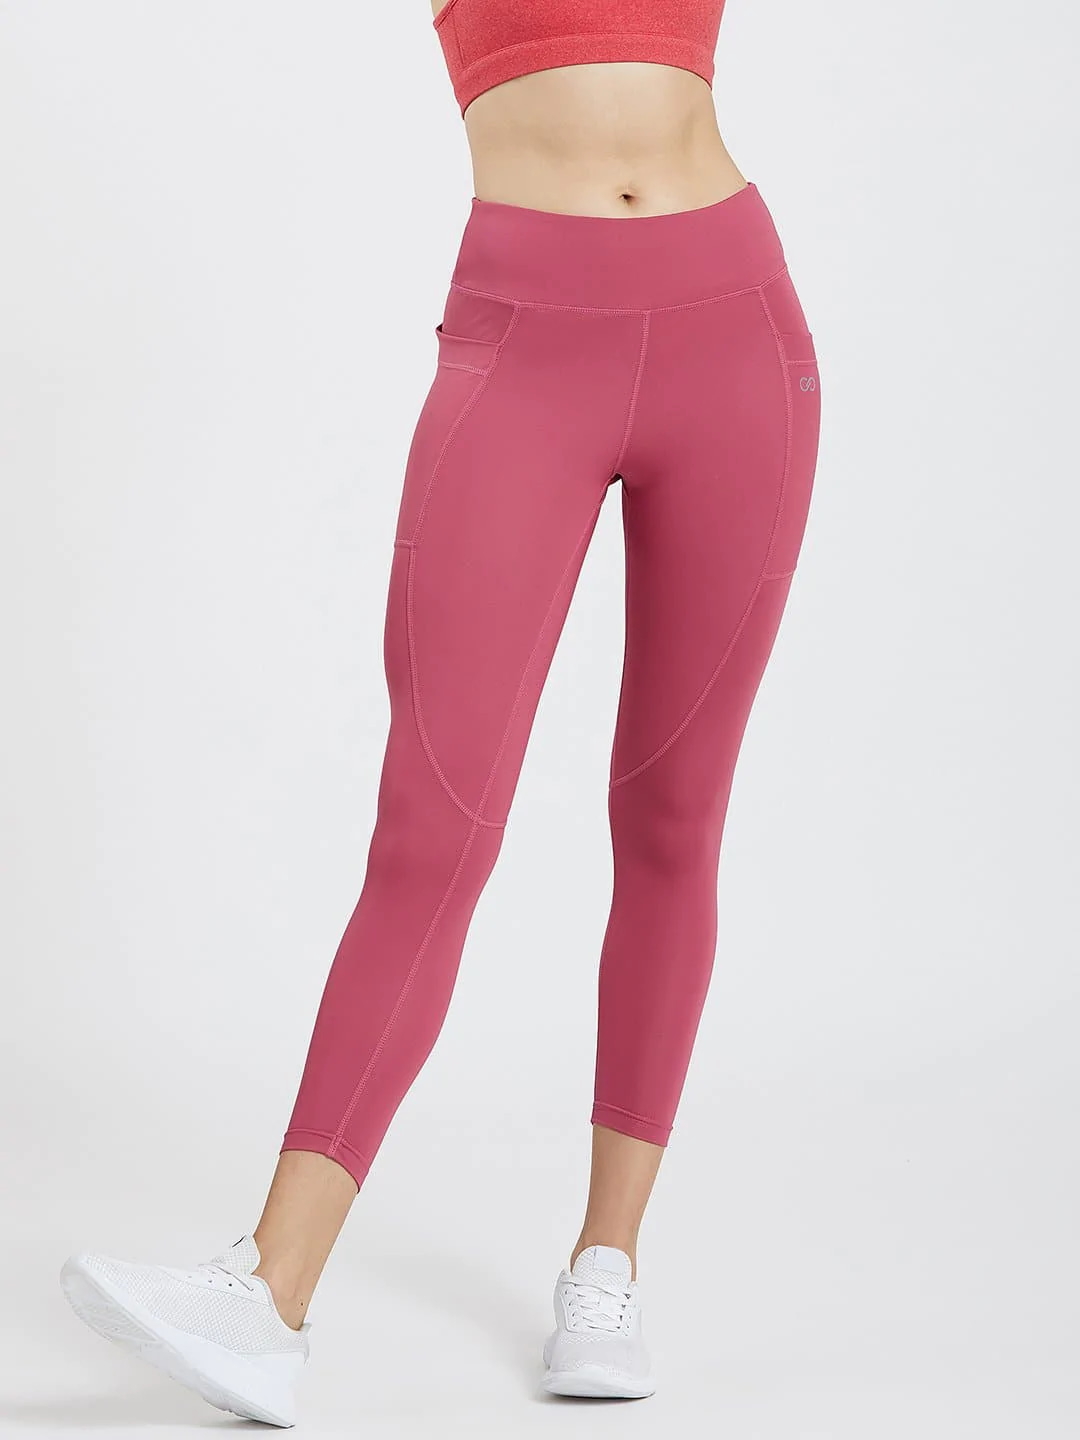 Leggings and Tights Buy Online in Qatar